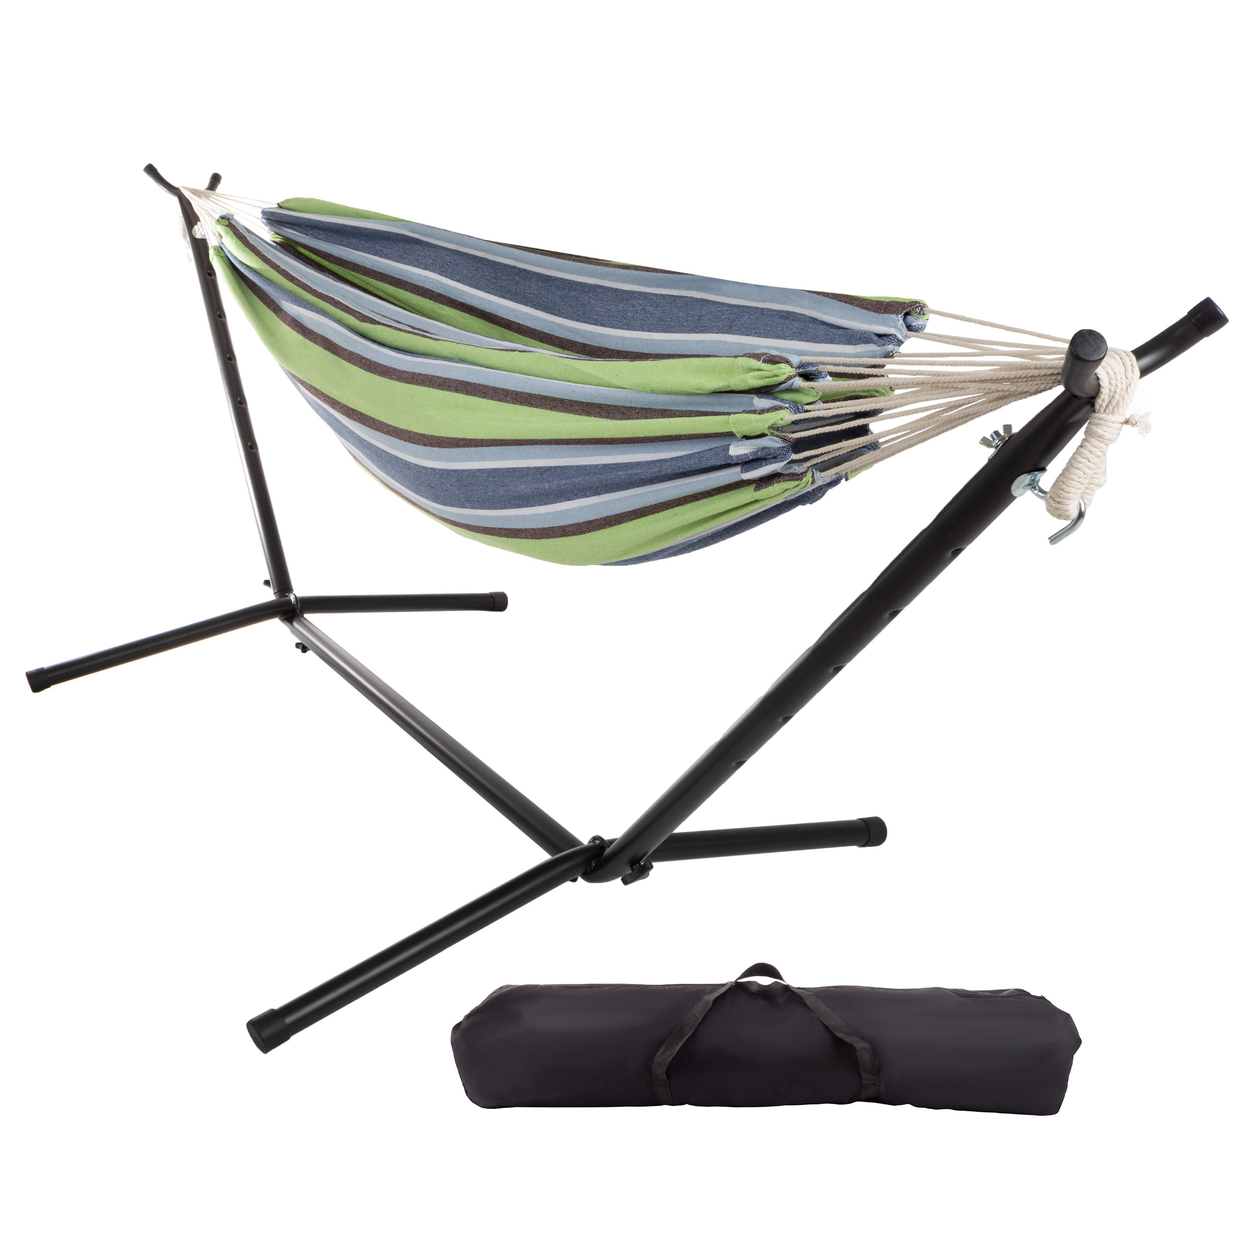 Double Hammock With Stand Carry Case Holds 400 Pounds Extra Wide - Blue, Lime, And White